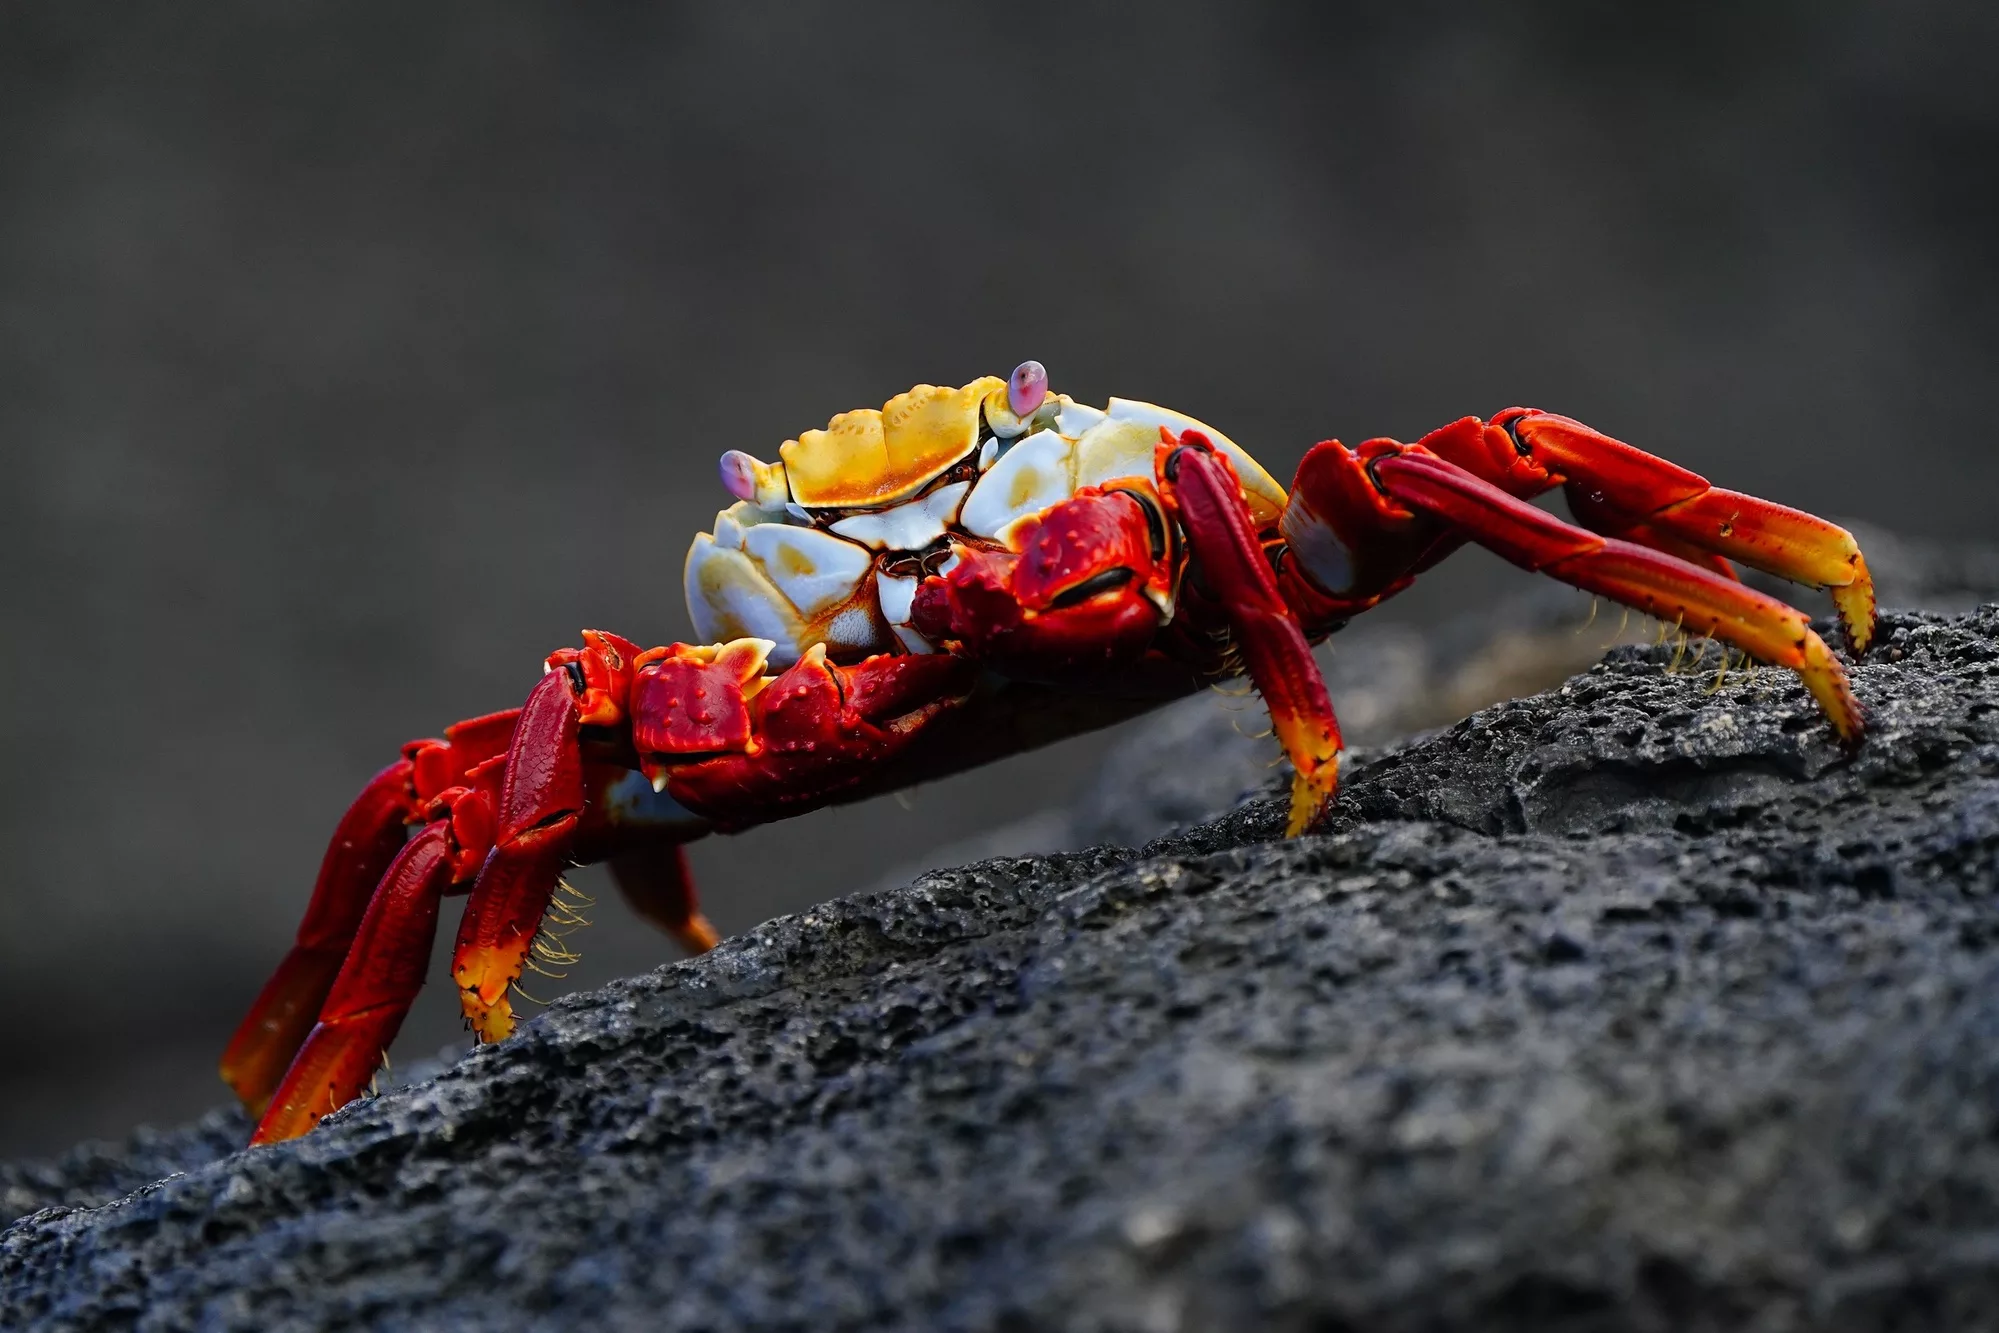 Galapagos Islands Guided Photography Experience - Sally lightfoot crab